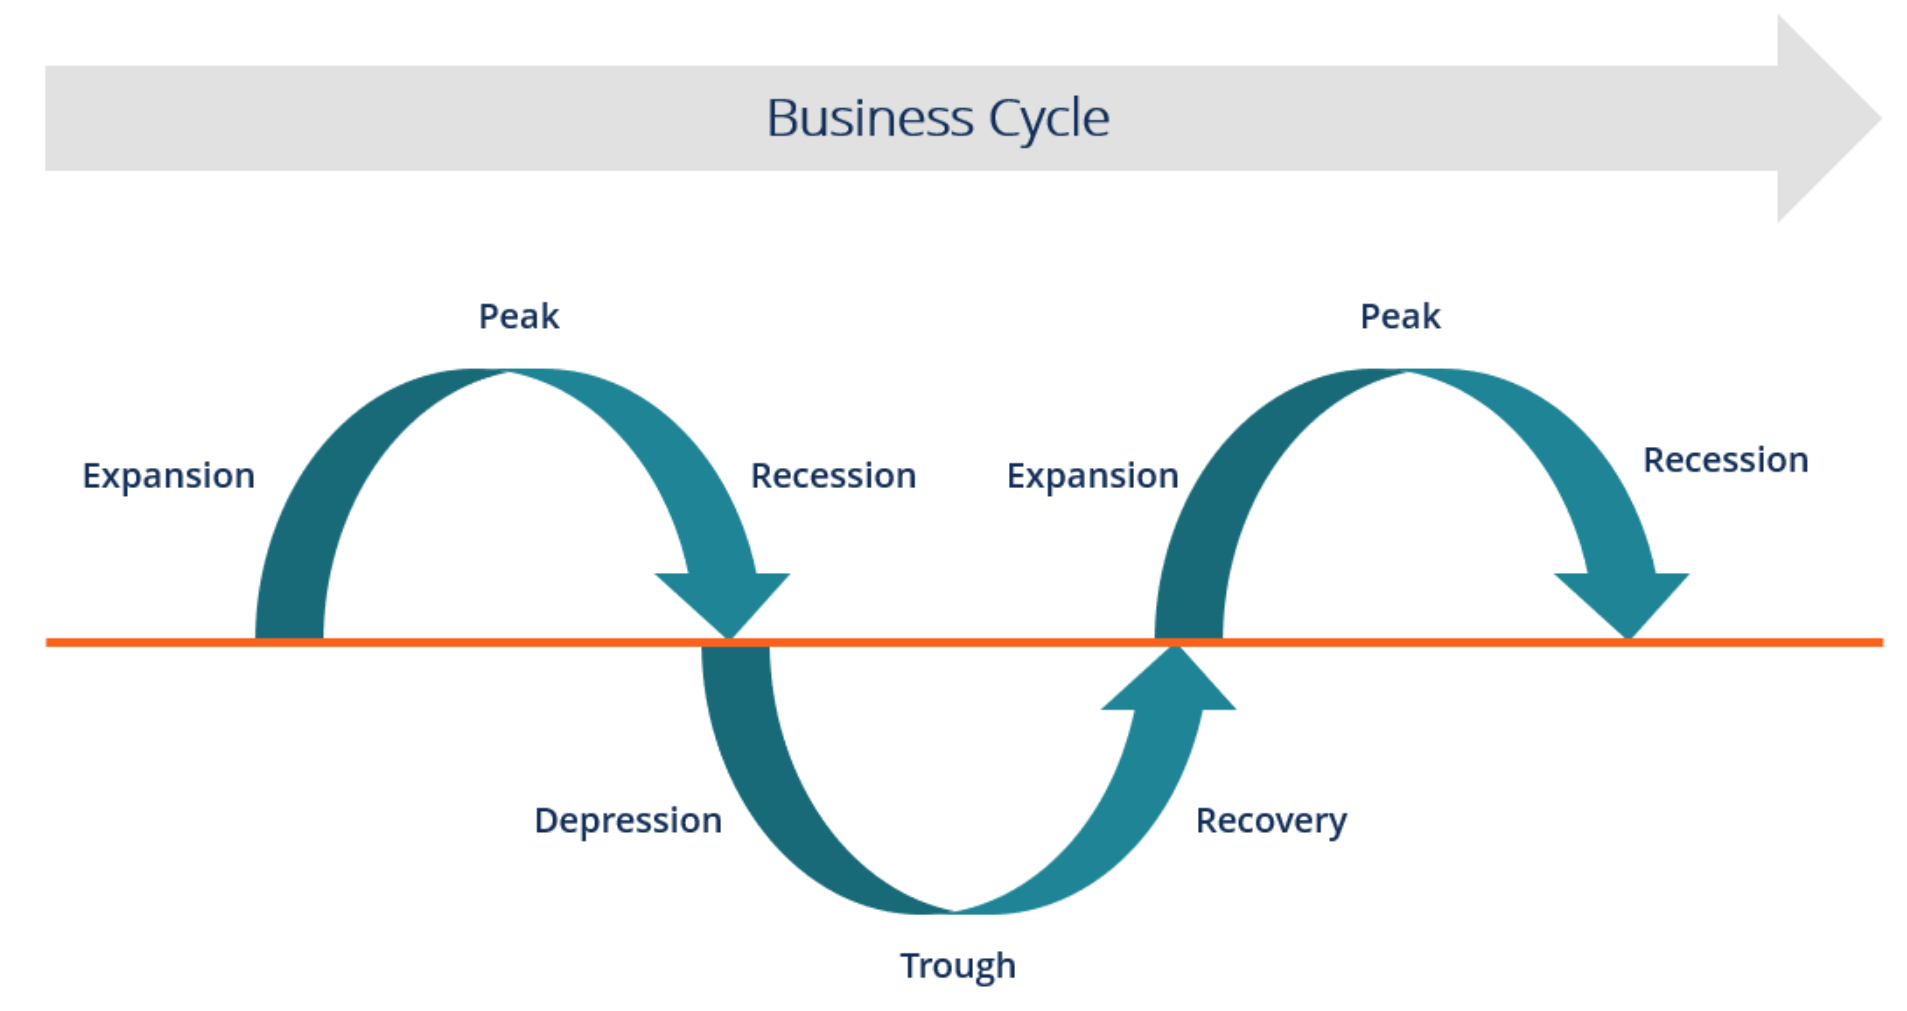 phases of business development